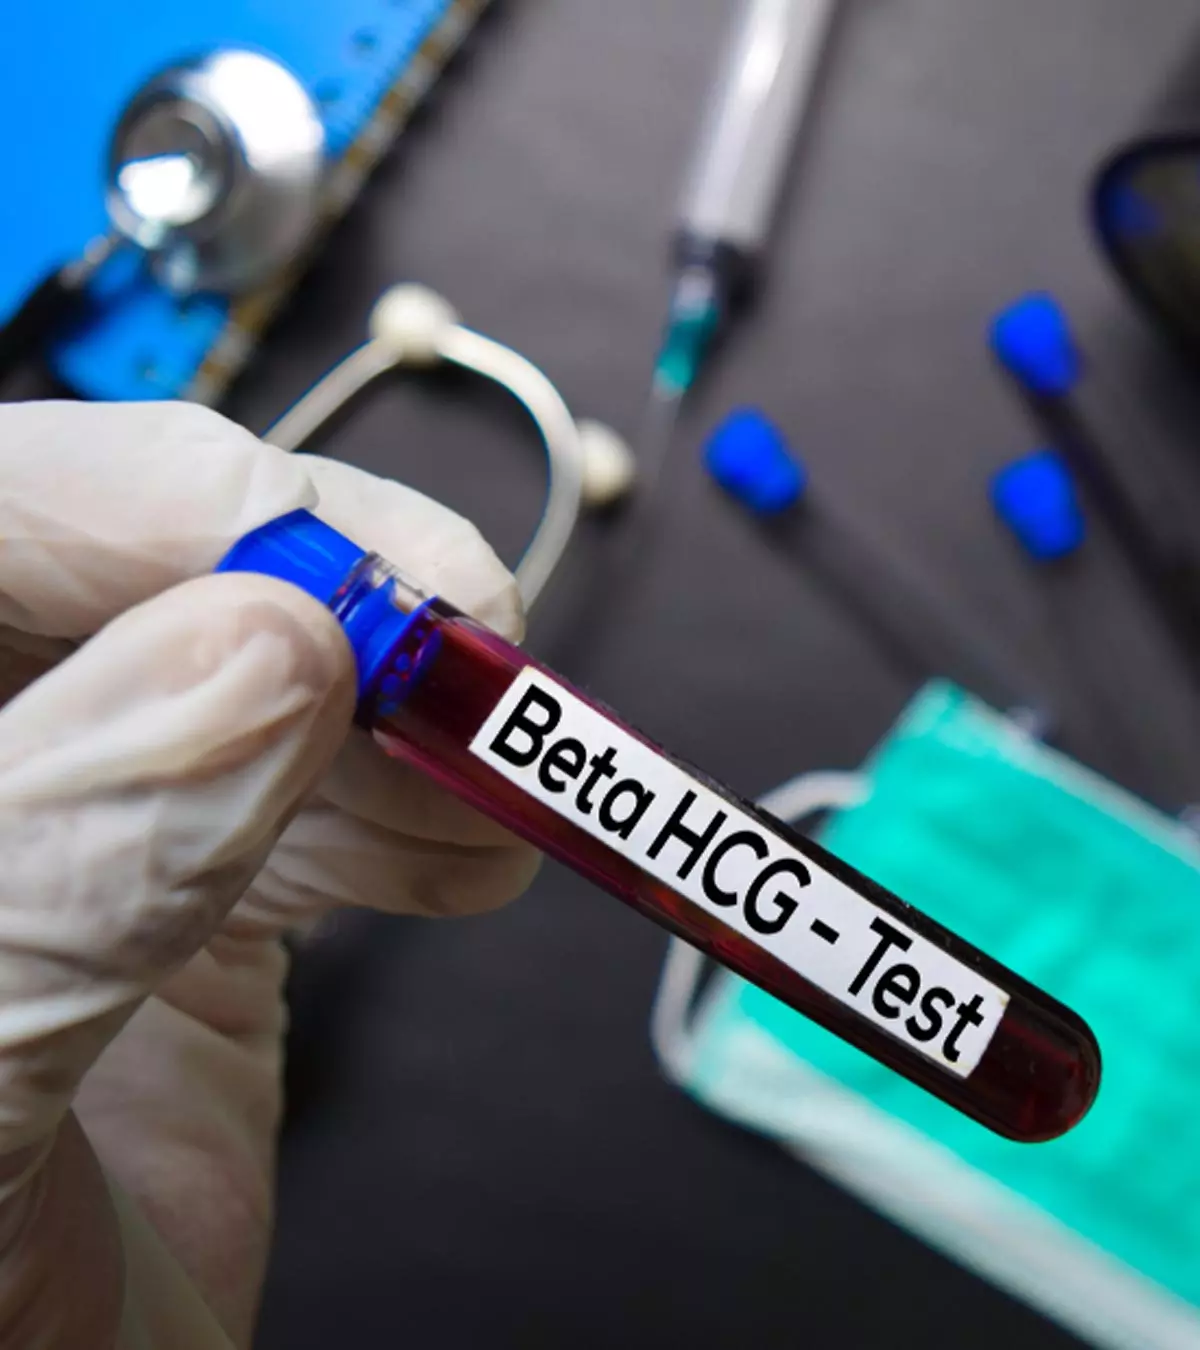 hCG Blood Pregnancy Test Procedure, Results And Accuracy